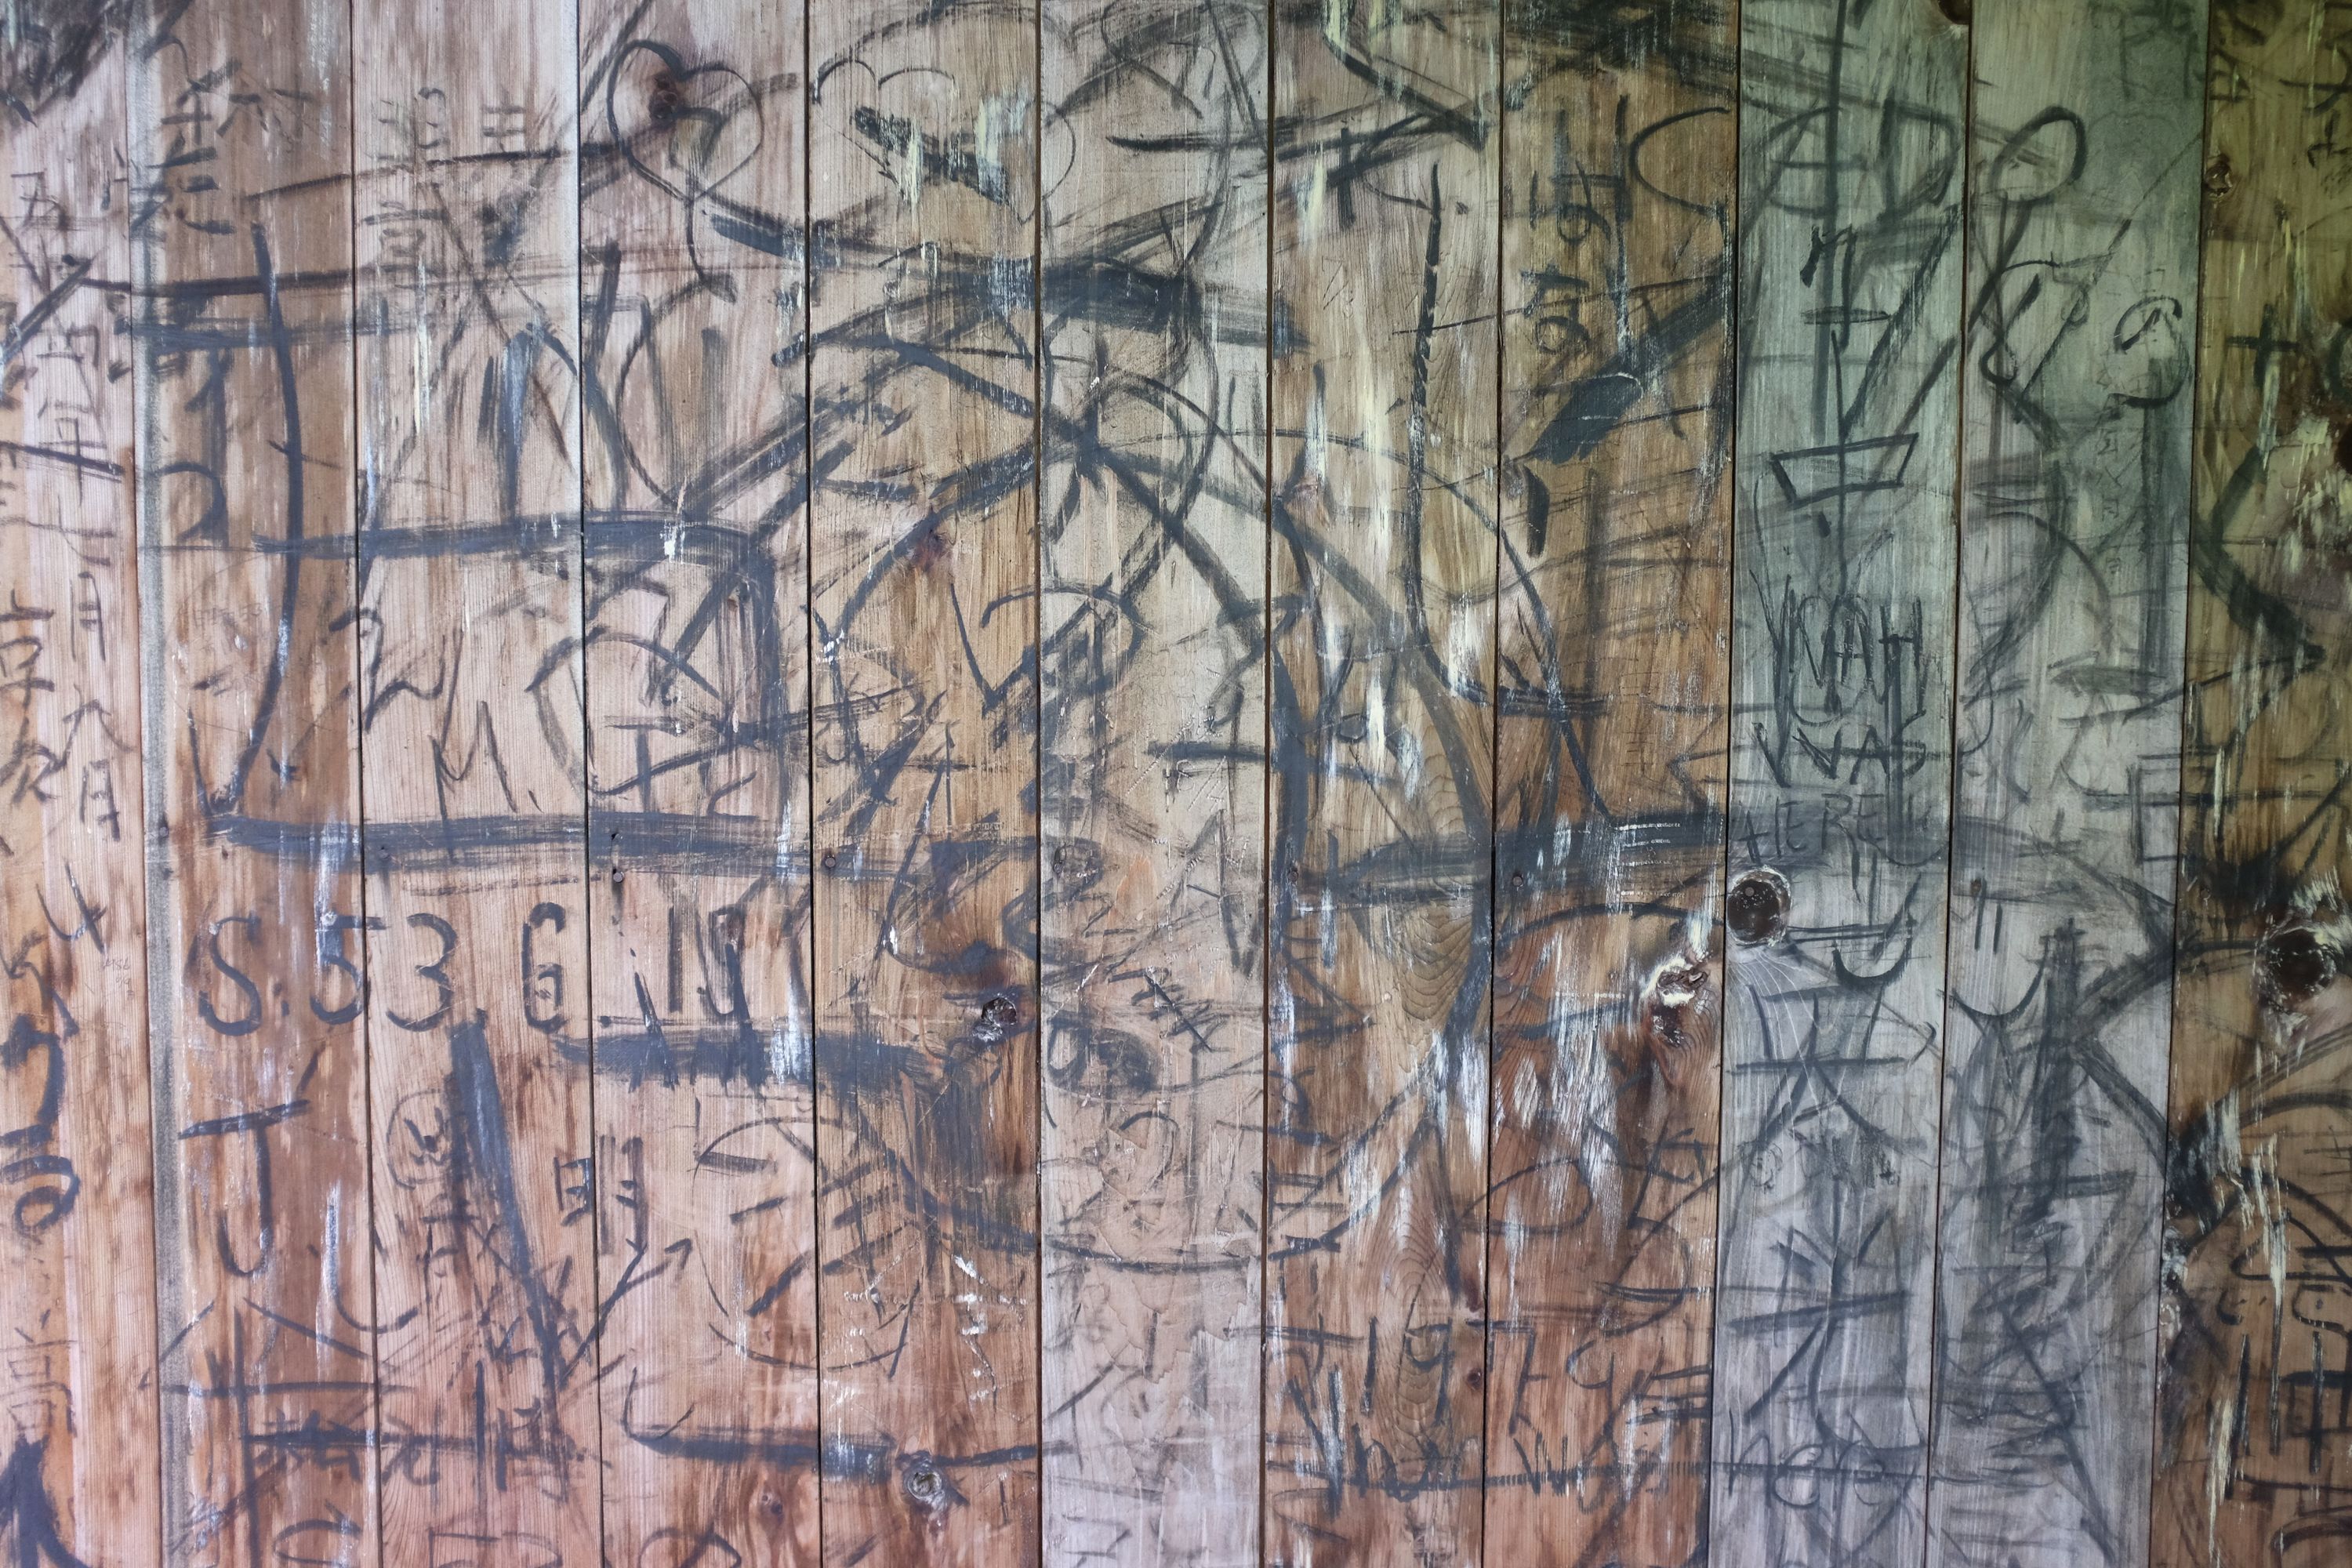 Wooden planks covered in Japanese scribbles.